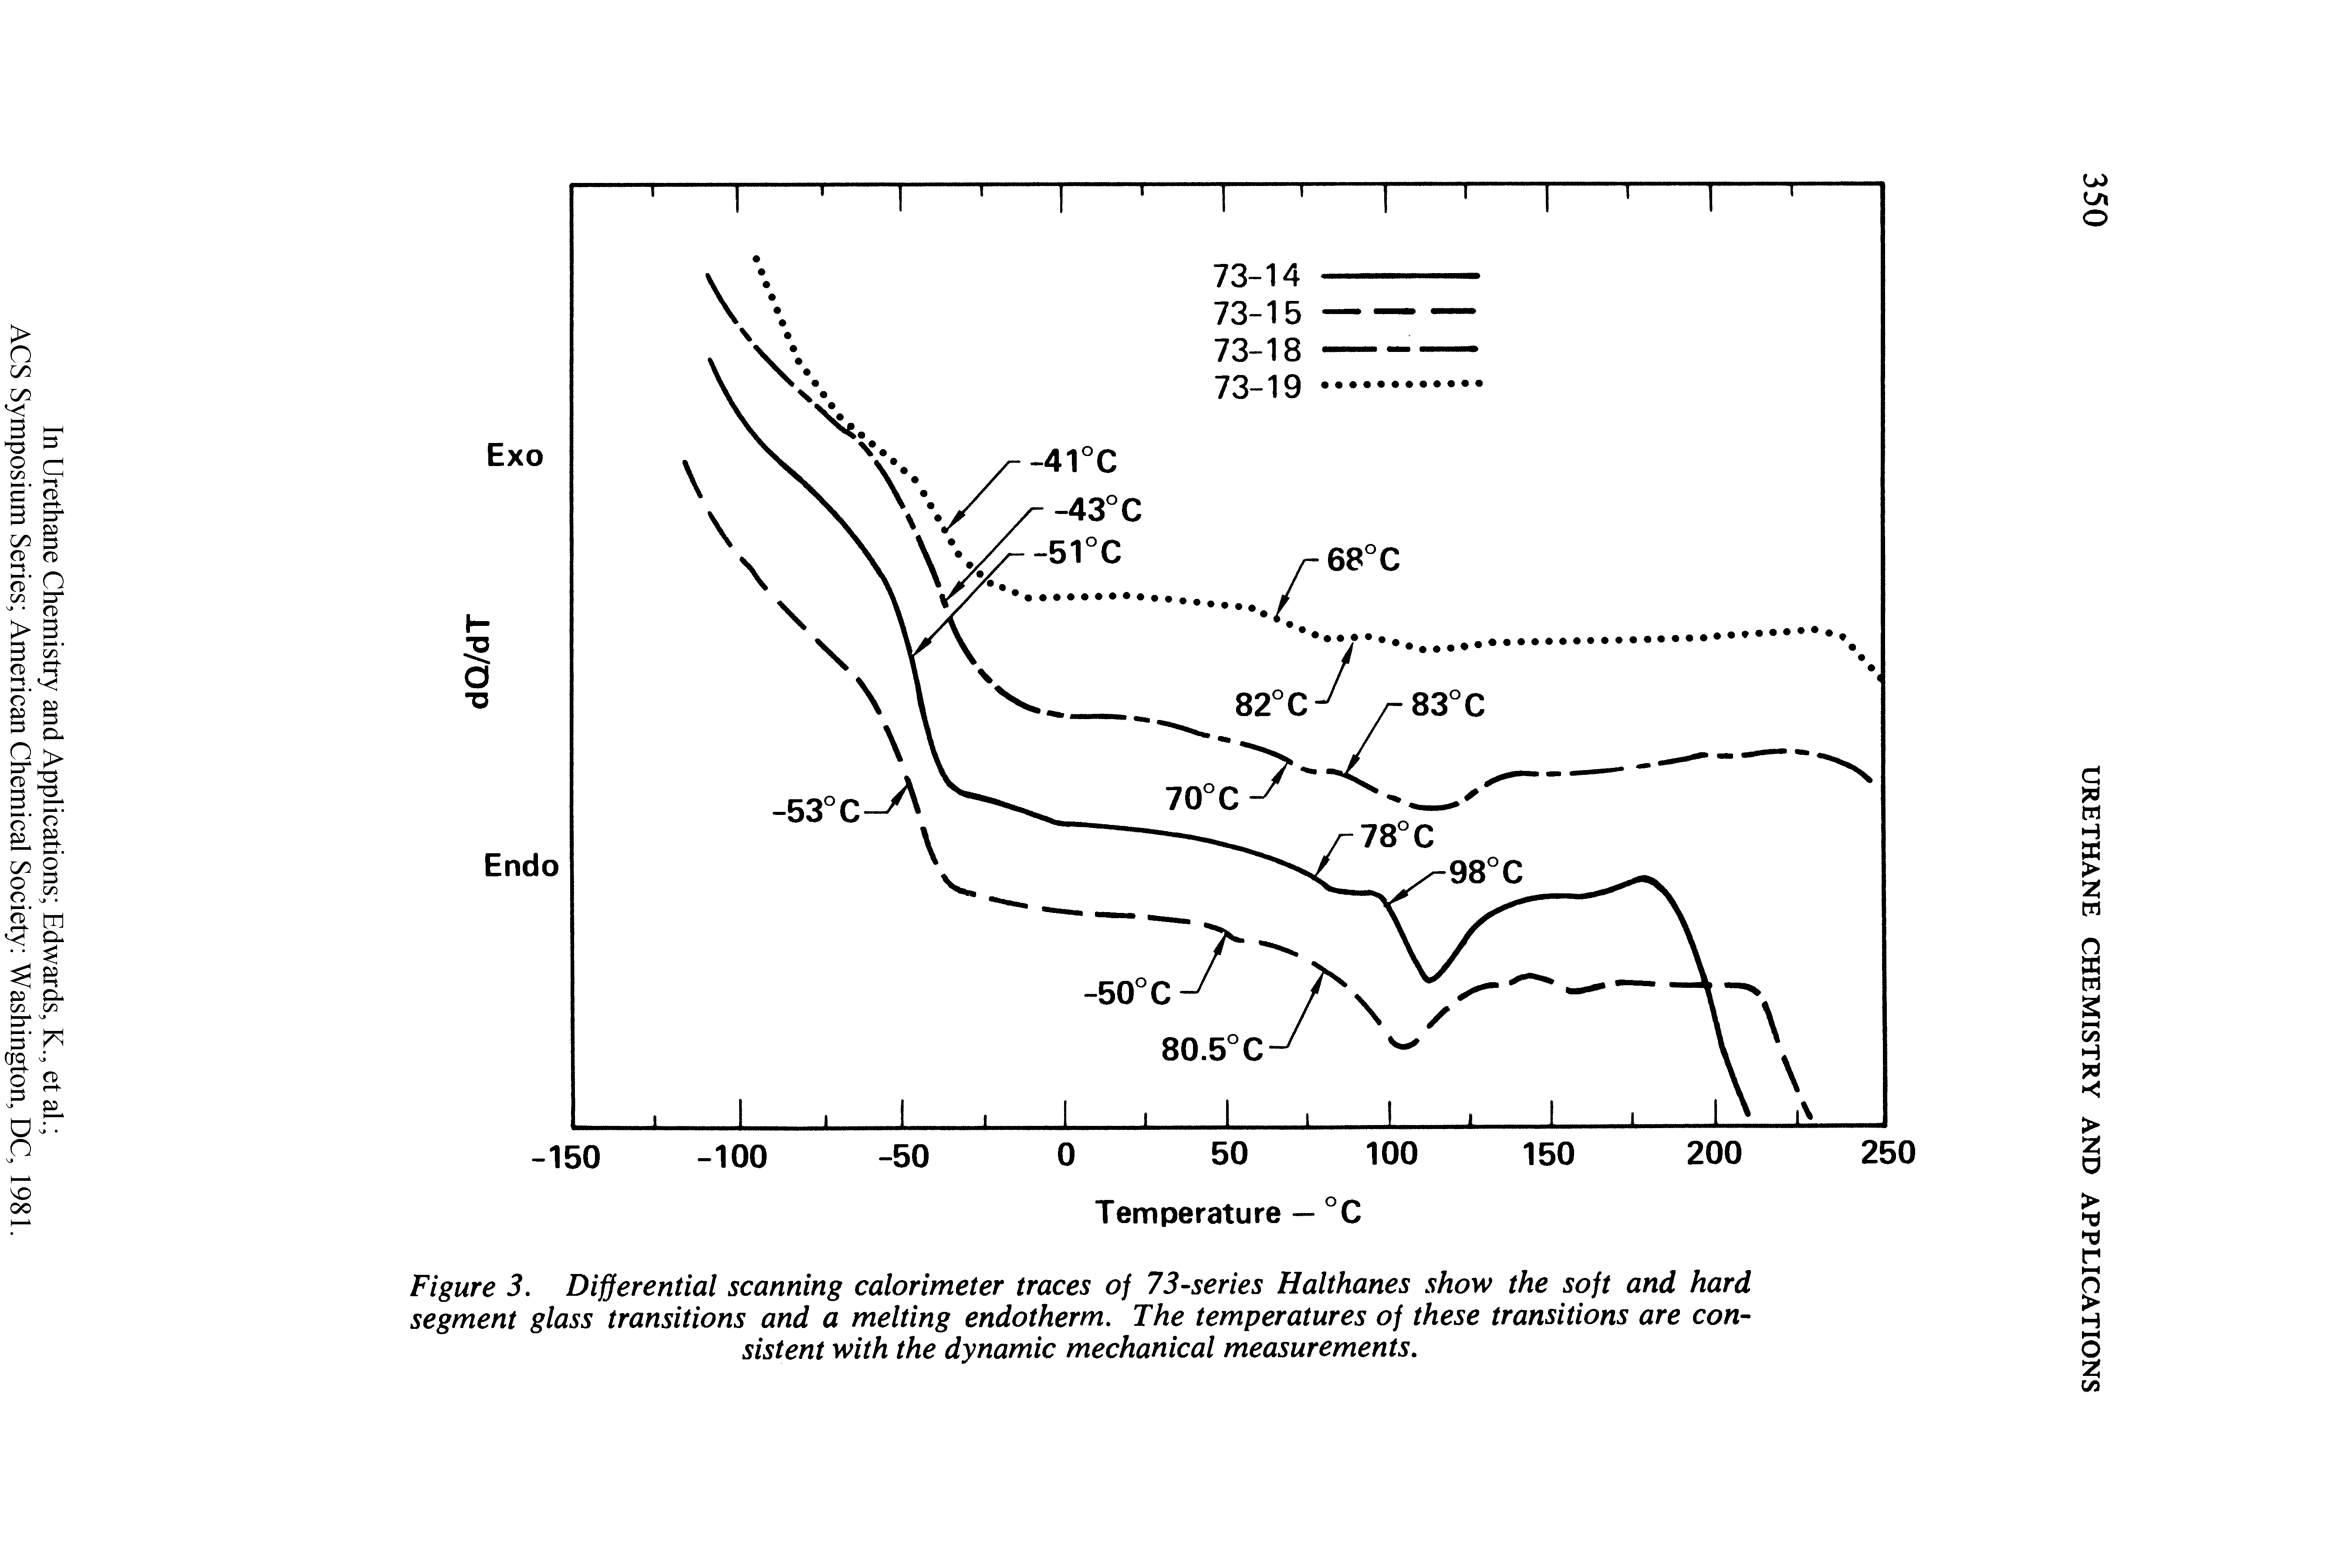 Figure 3. Differential scanning calorimeter traces of 73-series Halthanes show the soft and hard segment glass transitions and a melting endotherm. The temperatures of these transitions are consistent with the dynamic mechanical measurements.